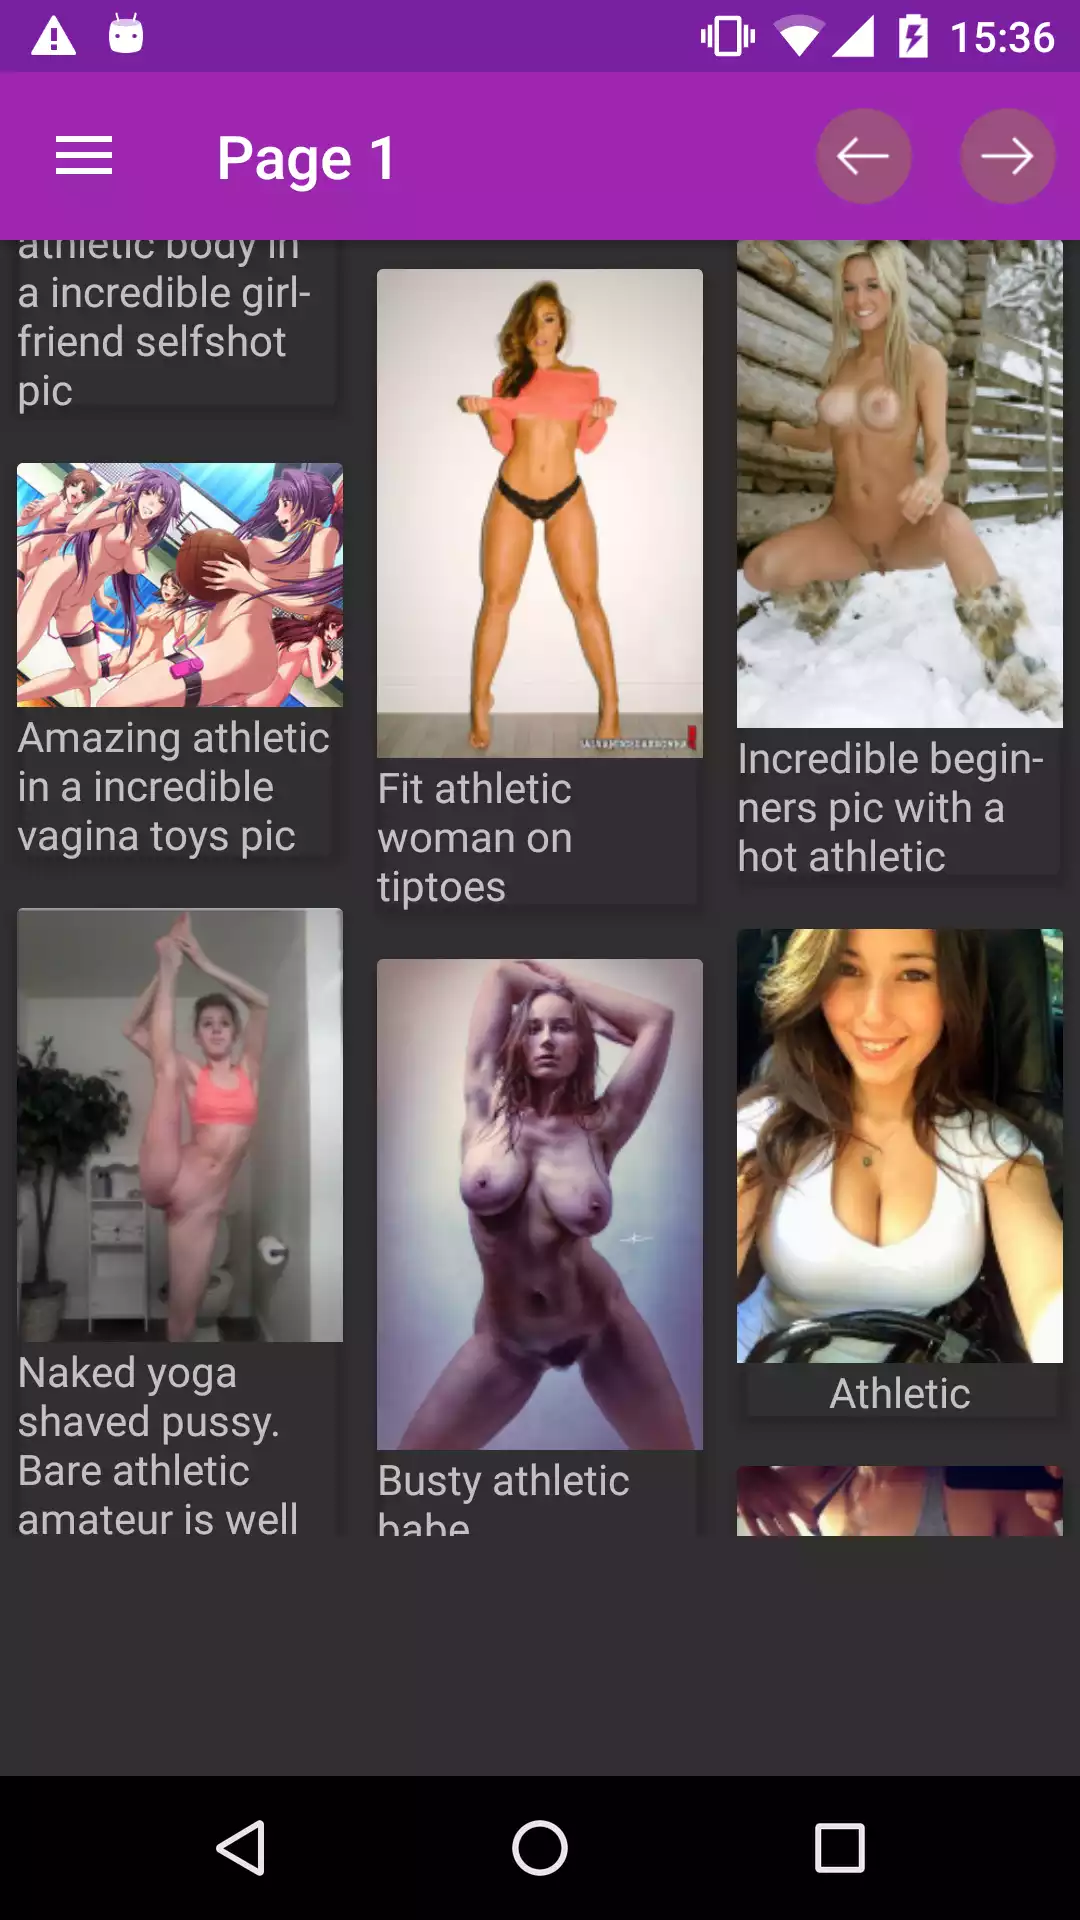 Muscle Pics offline,app,demonic,hentai,sexy,henati,ebony,hot,android,mythras,porn,fuck,images,download,erotic,photos,apps,pic,anime,pics,feast,nhentai,lair